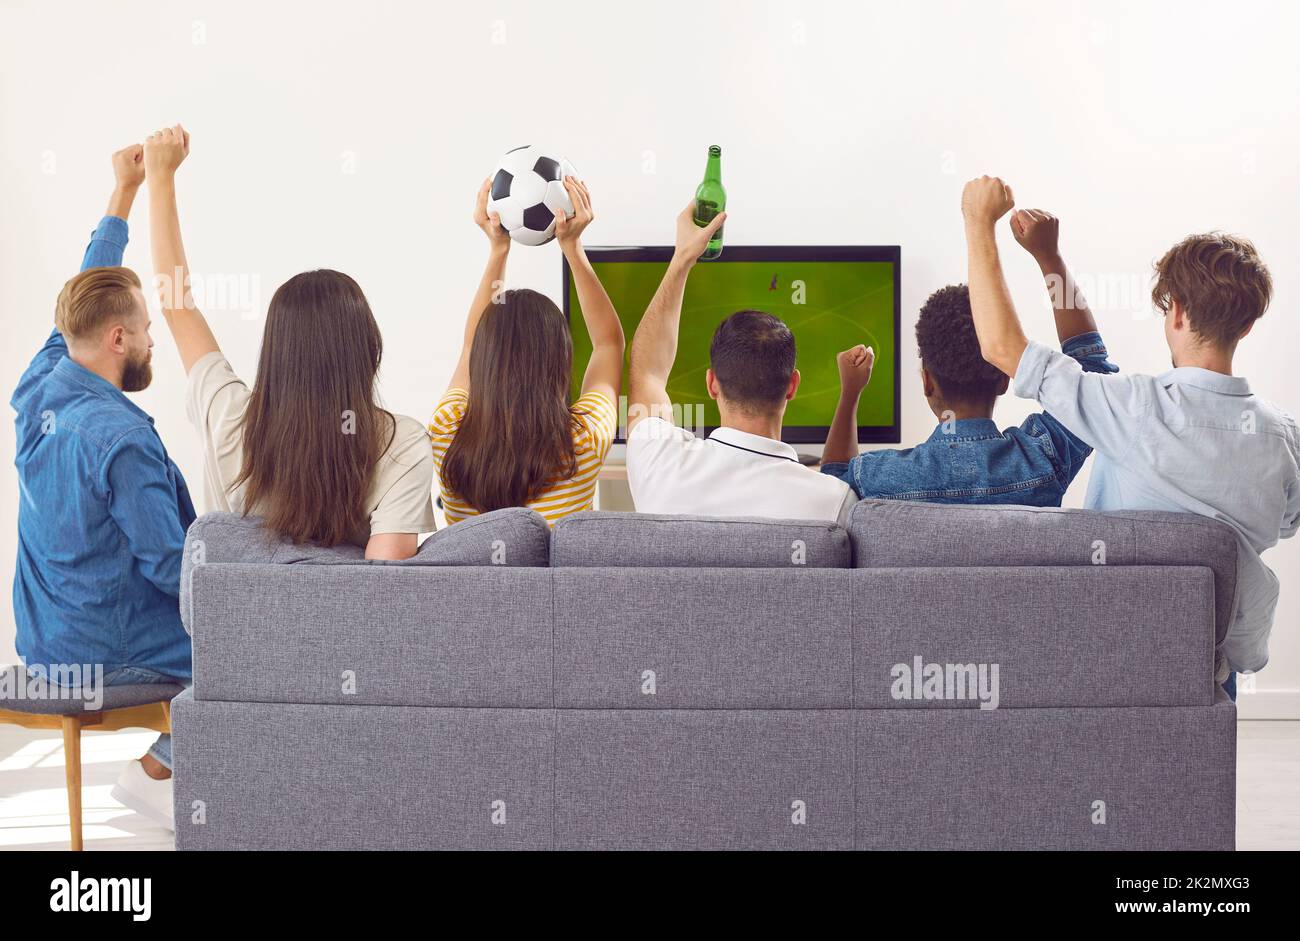 Group of happy friends sitting on couch, drinking beer and watching soccer on television Stock Photo